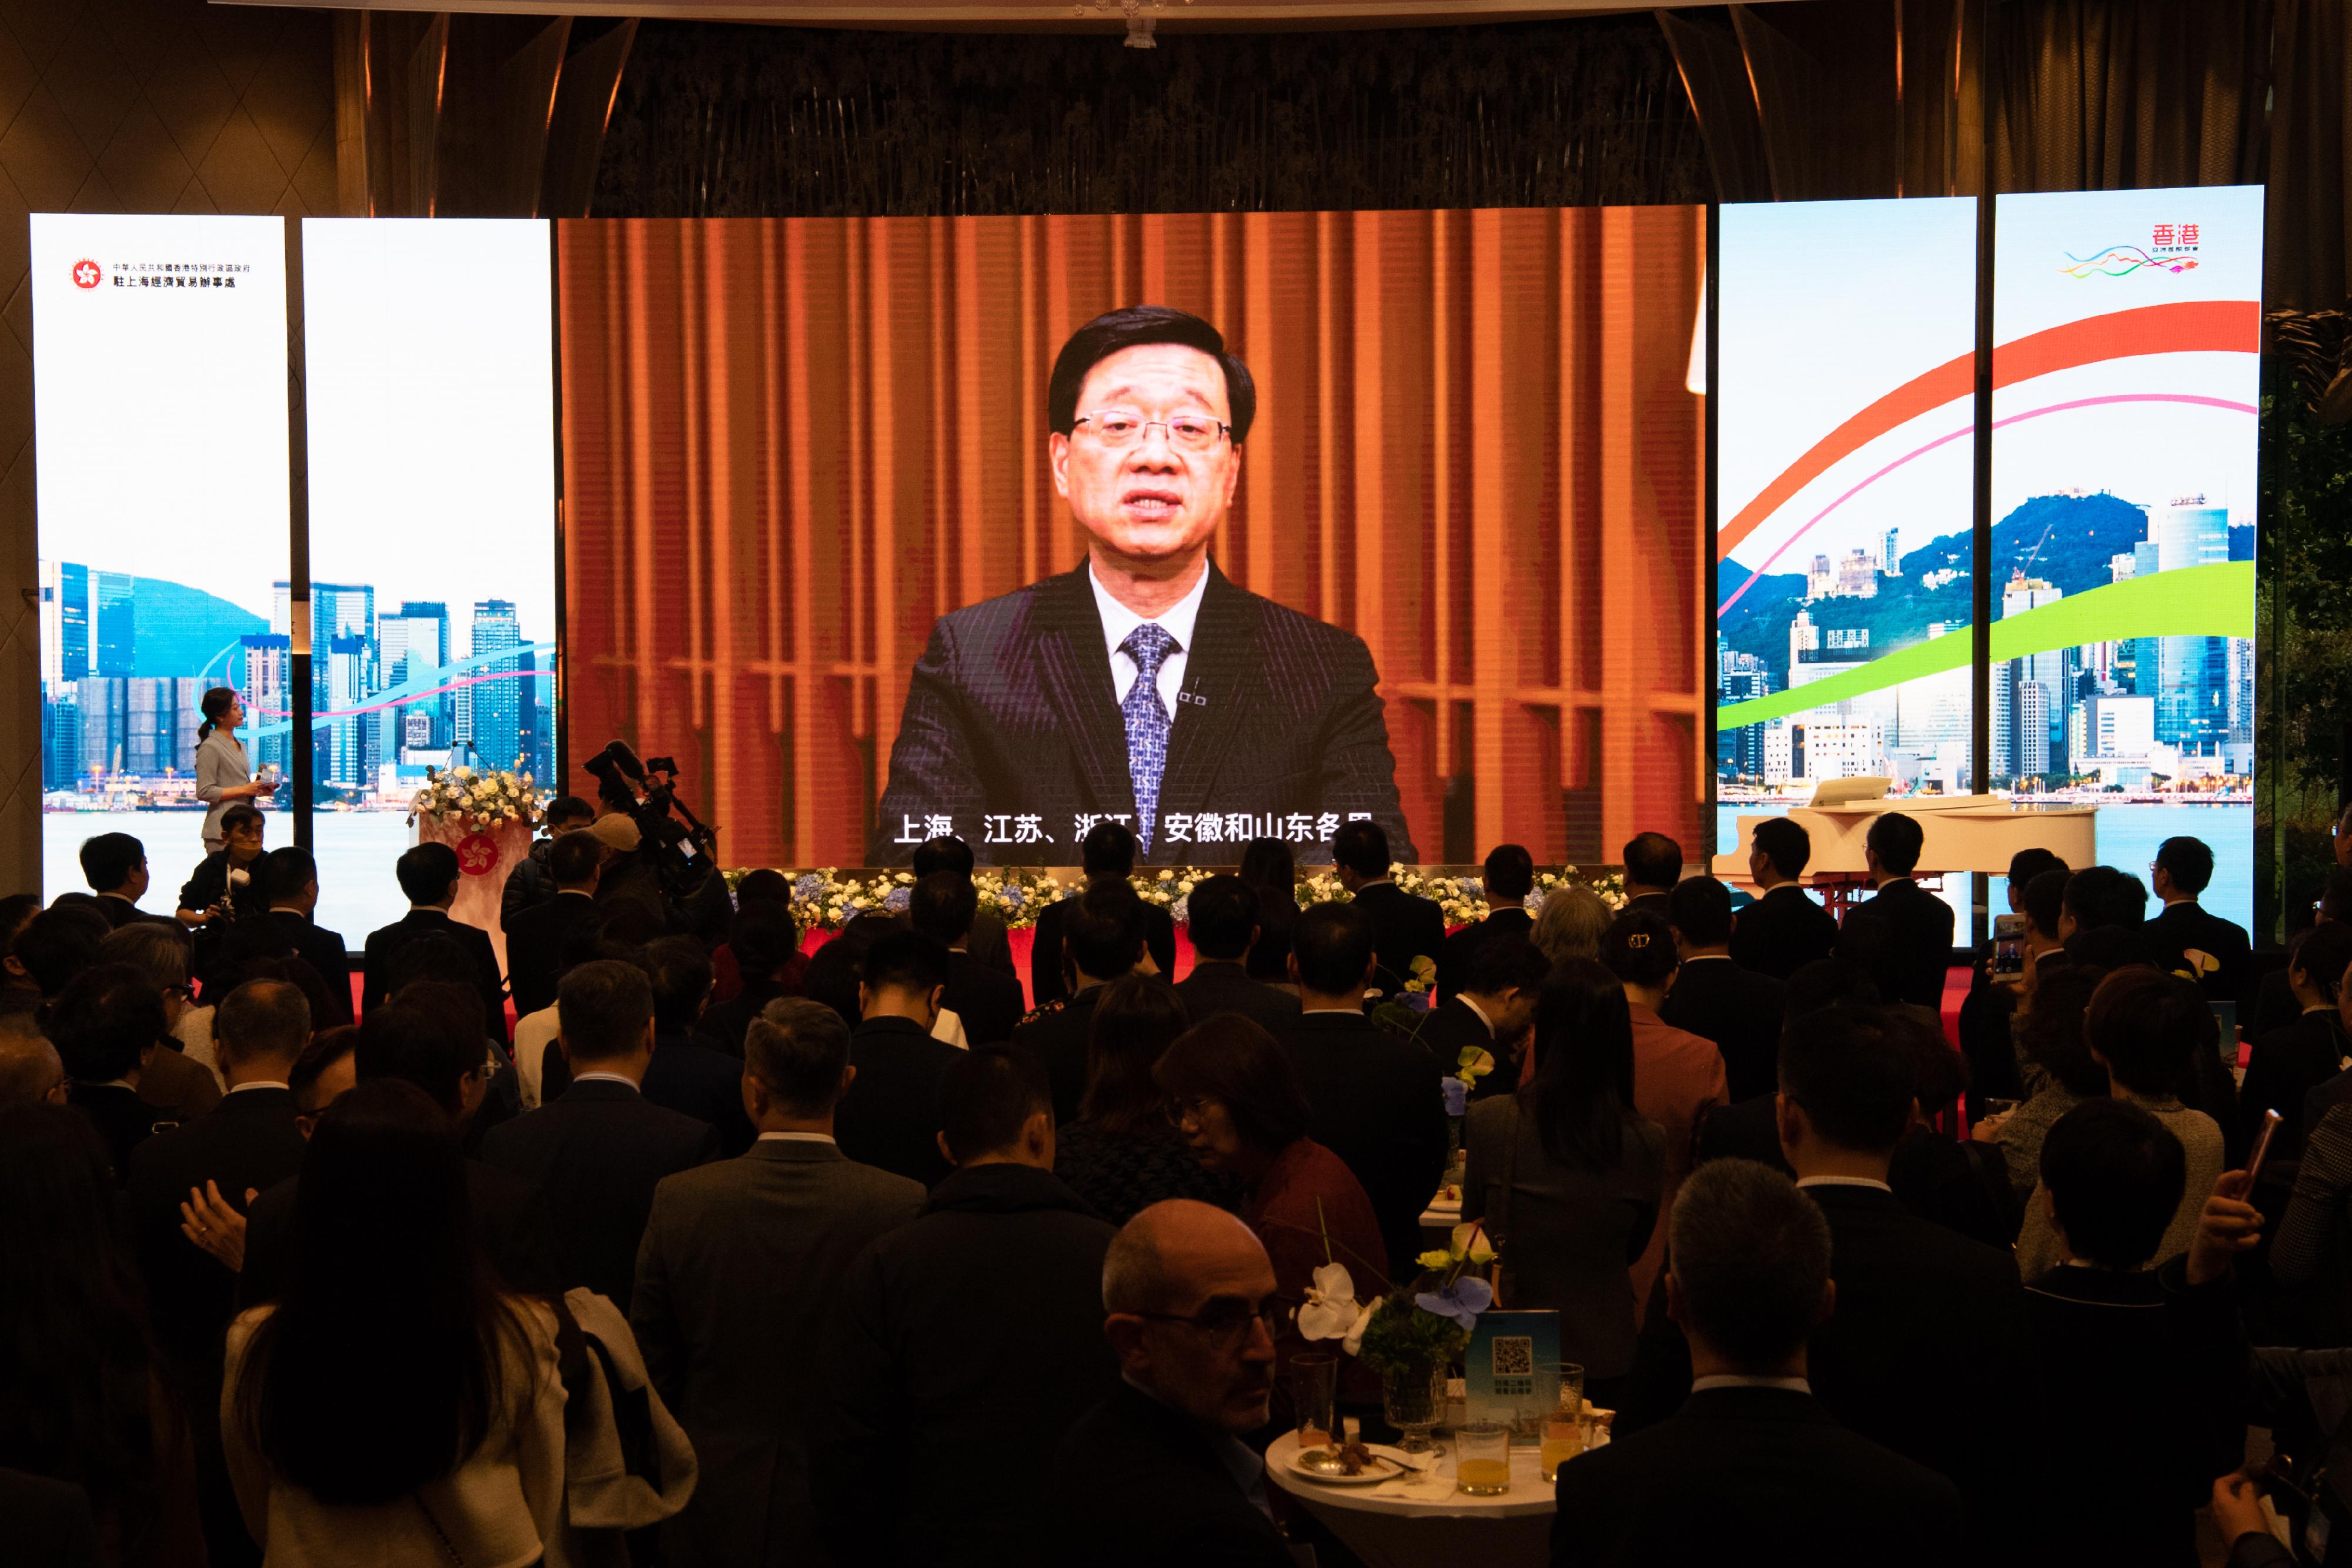 The Hong Kong Economic and Trade Office in Shanghai held a "Hello, Hong Kong!" East China Region Reception in Shanghai today (March 23). Photo shows the Chief Executive, Mr John Lee, delivering a pre-recorded speech at the reception.